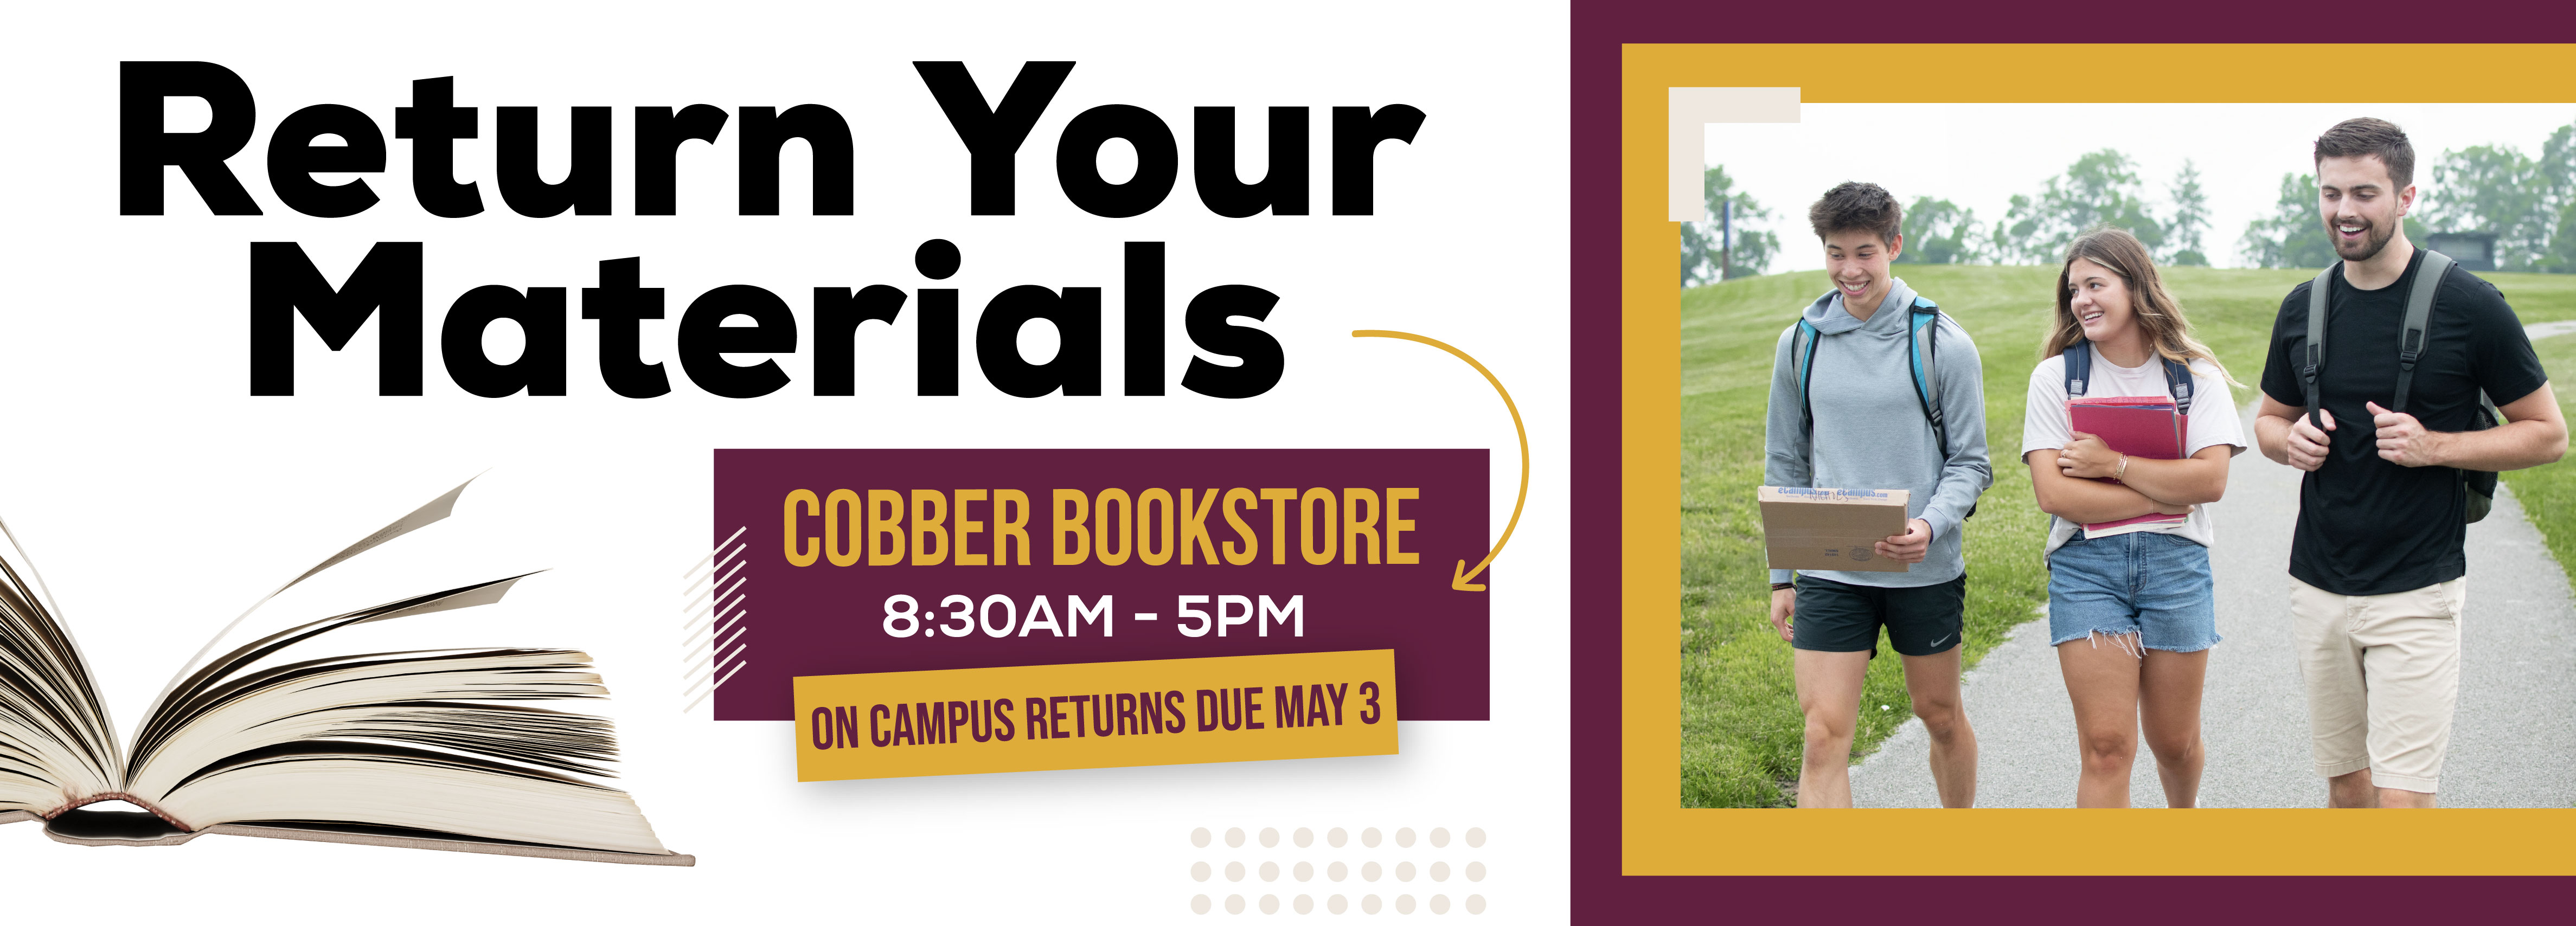 Return Your Materials Cobber Bookstore 8:30AM - 5PM  - On Campus Returns Due May 3